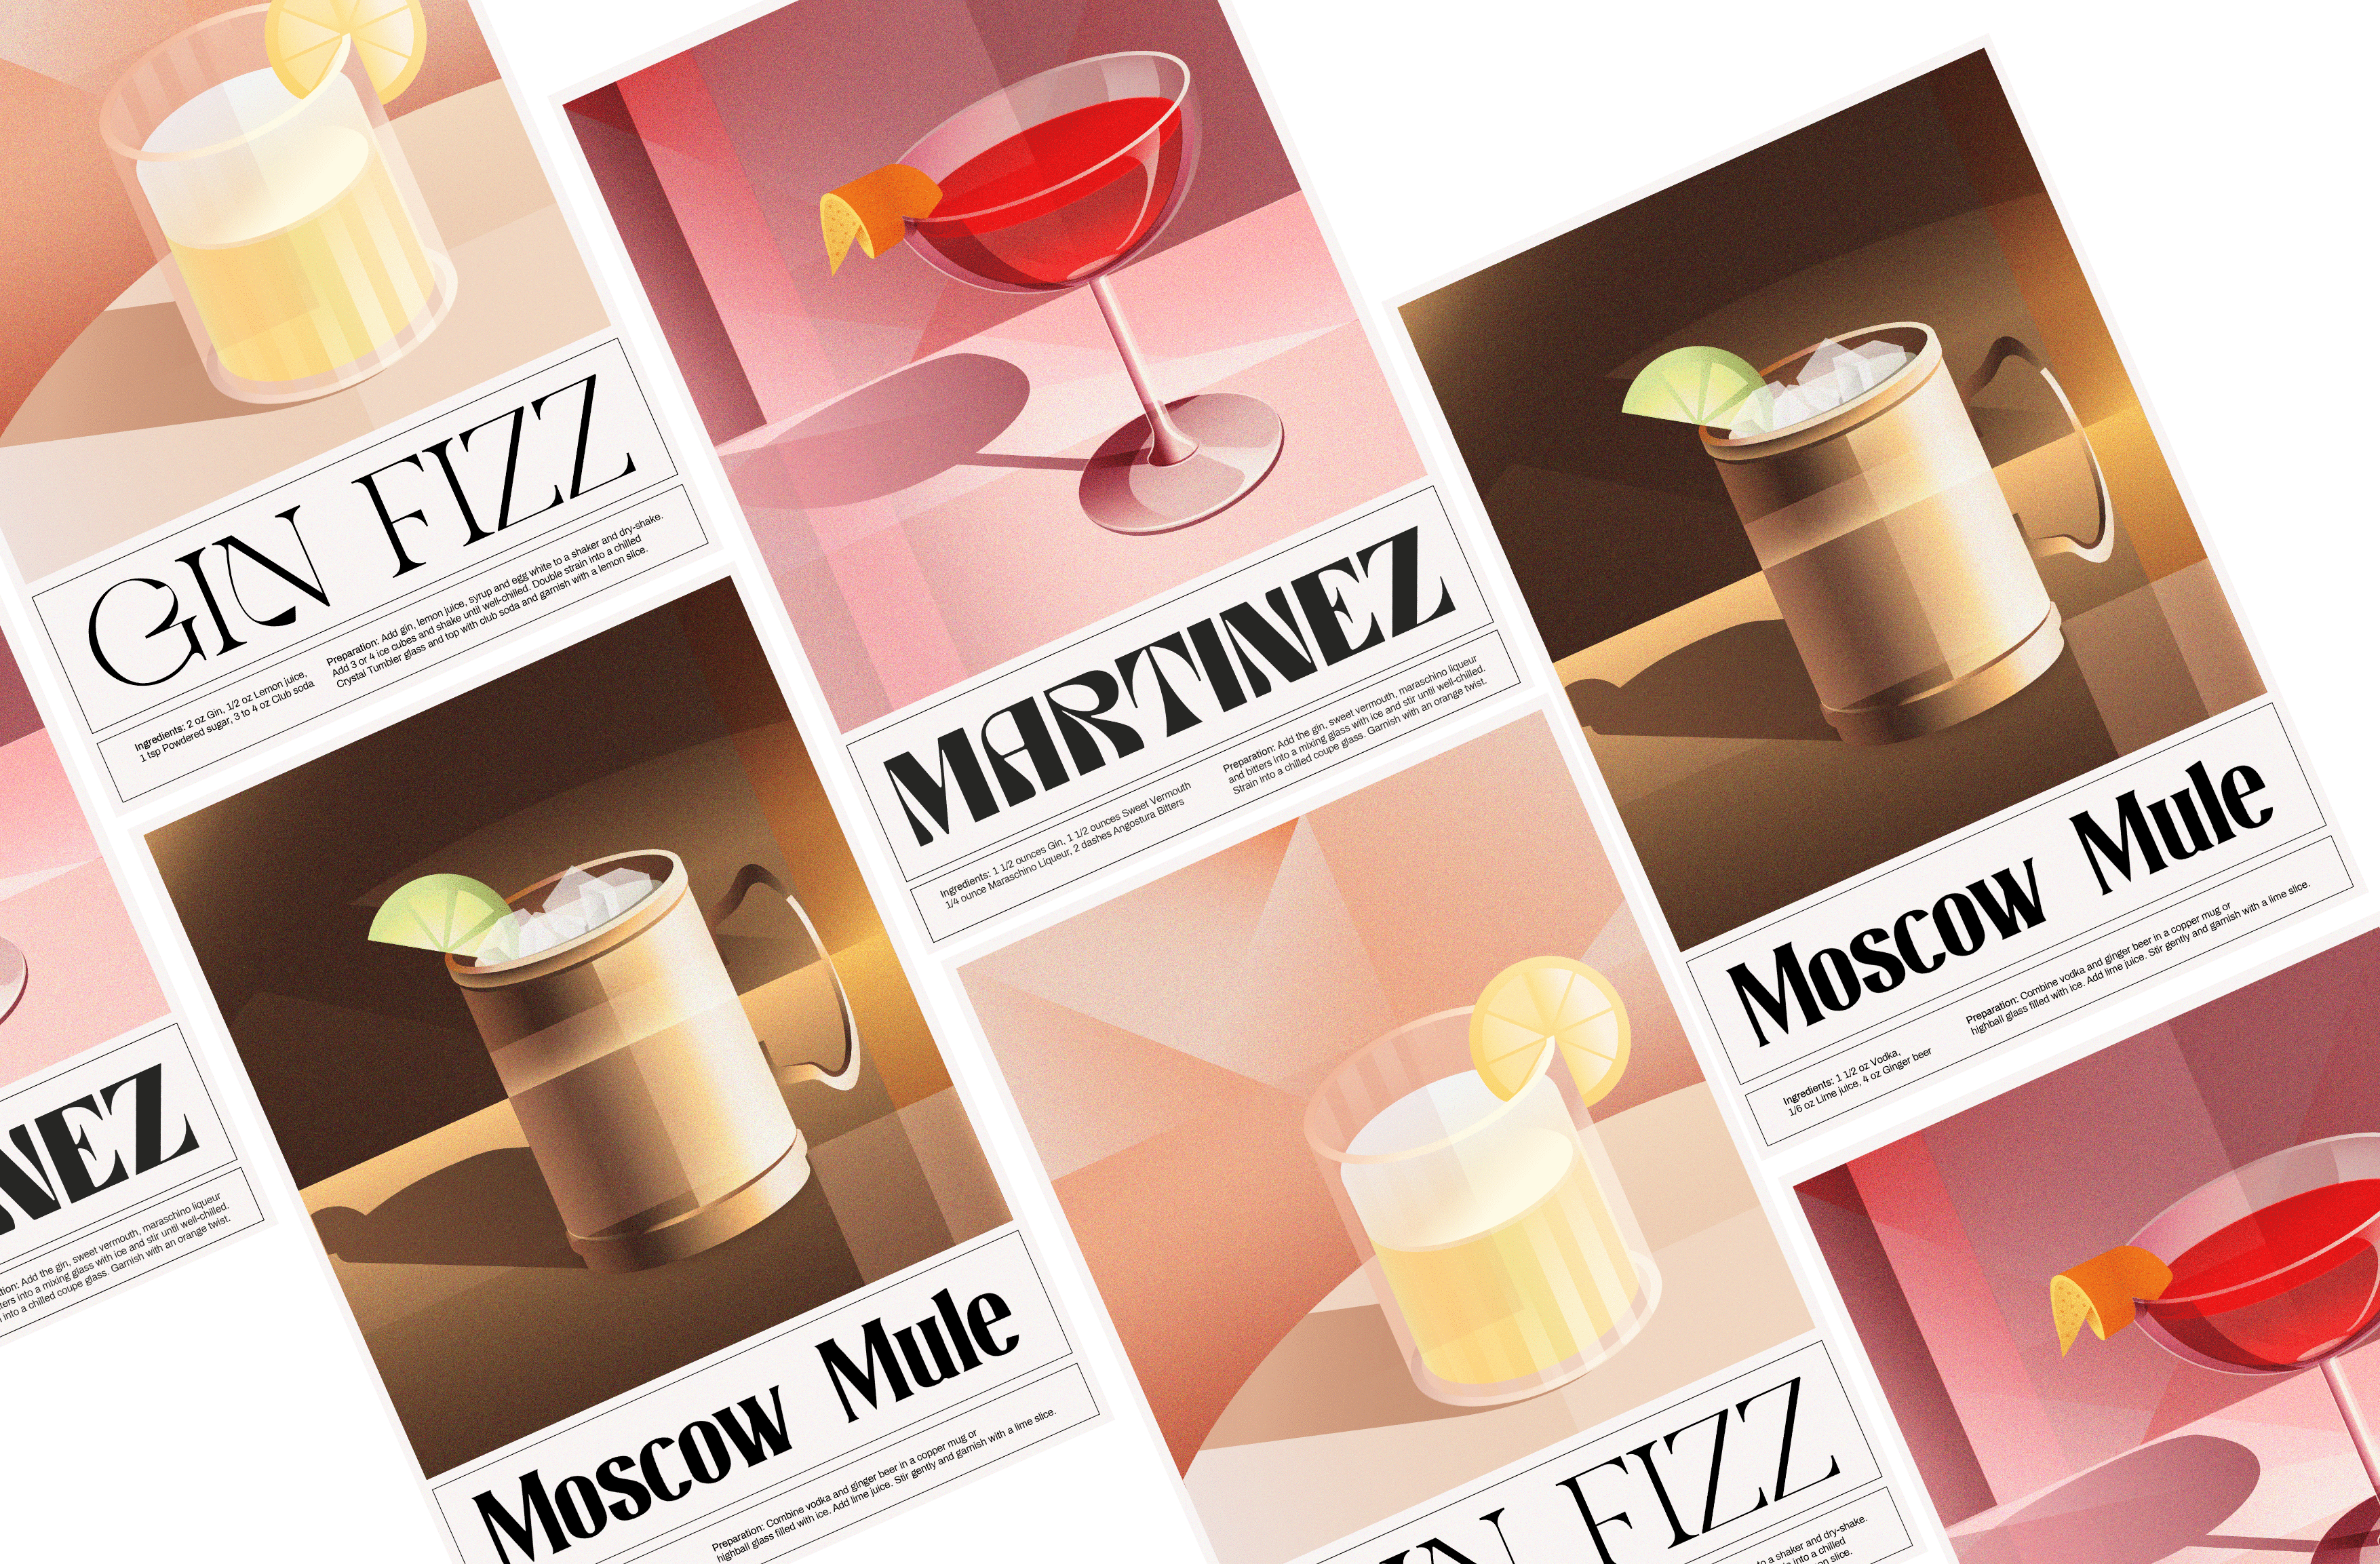 Moscow Mule rendition image